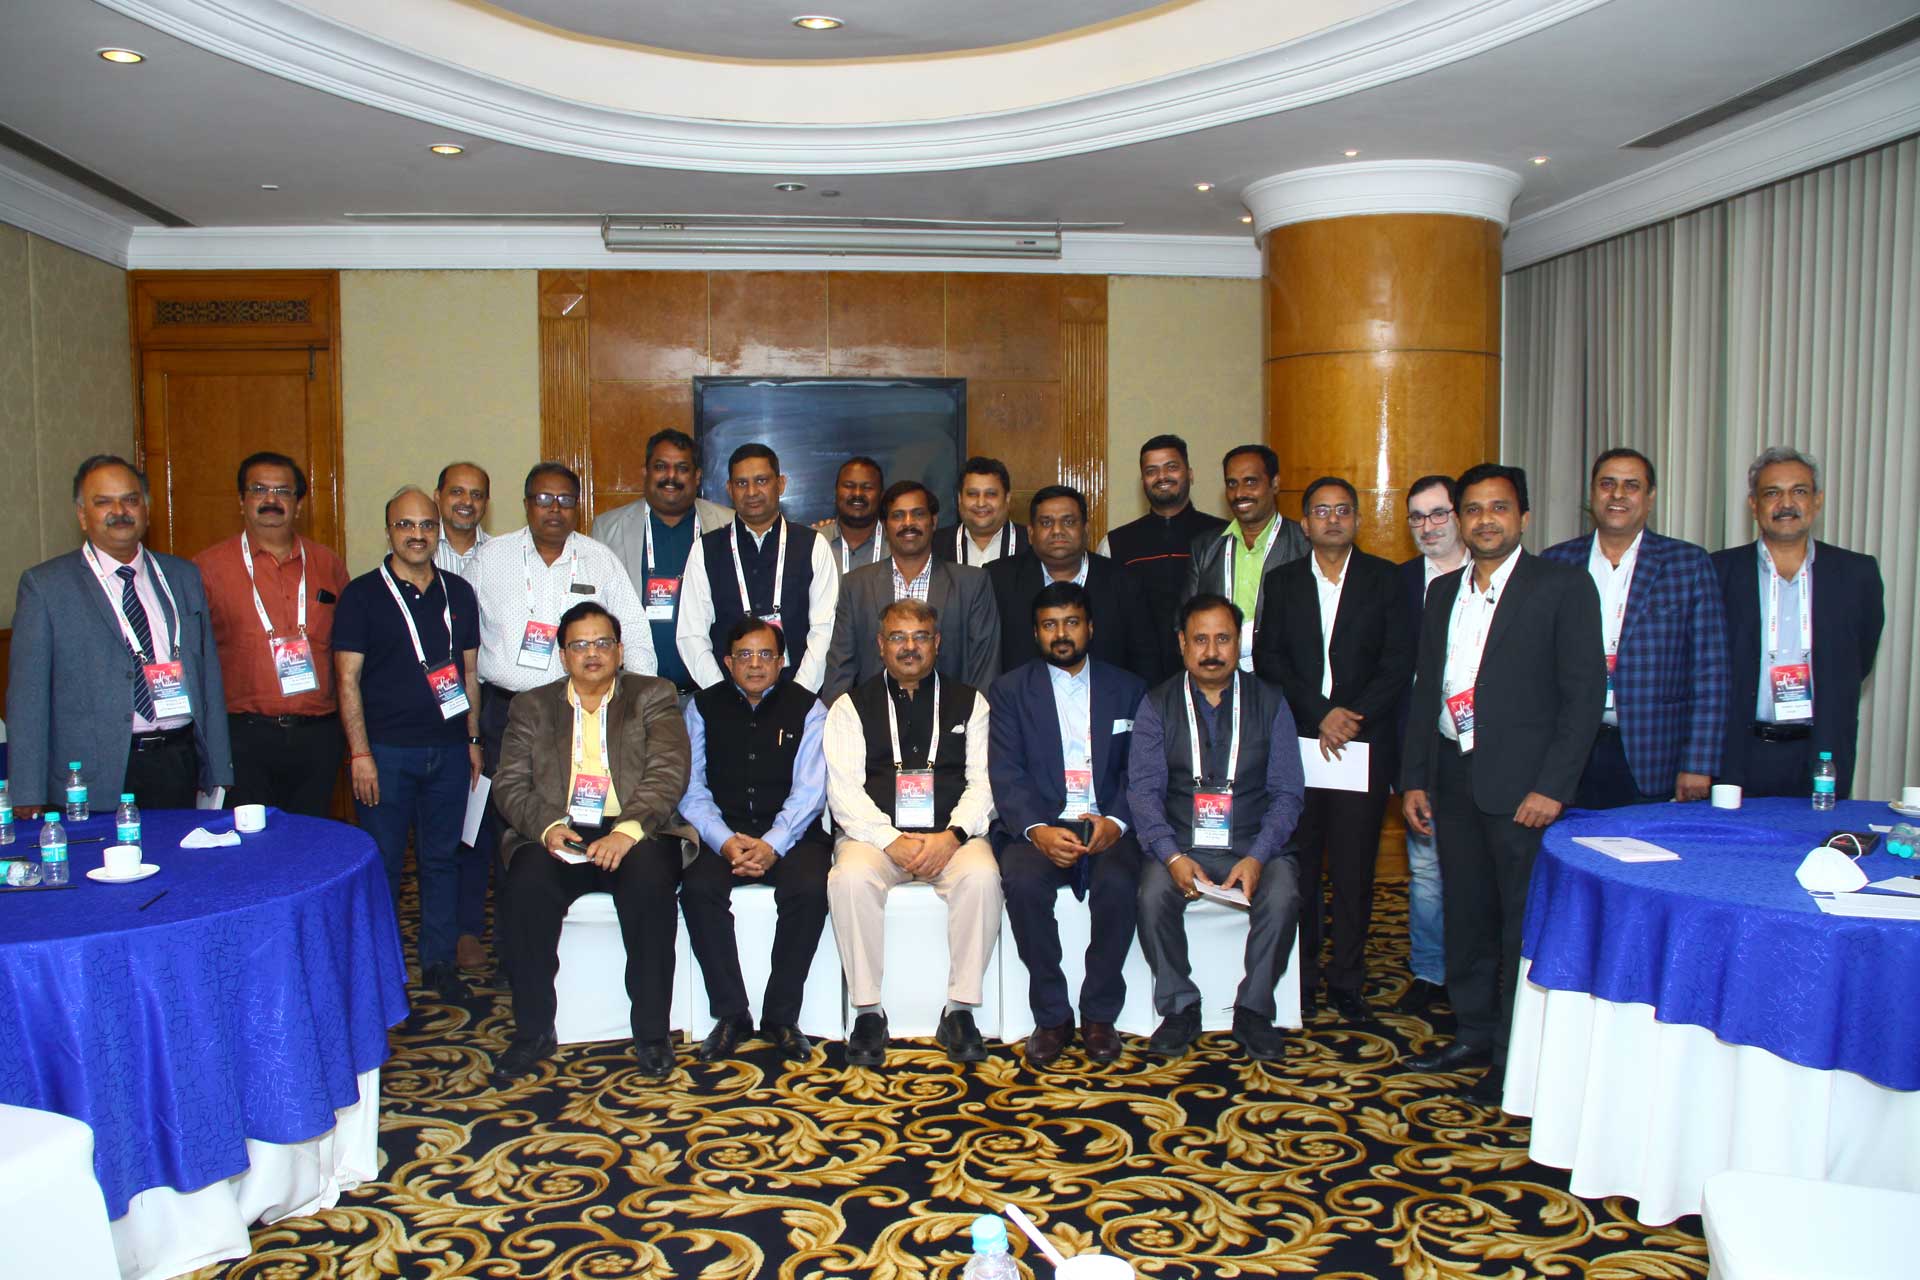 IT Associations from Across the Country attended at 20th Star Nite Awards 2021